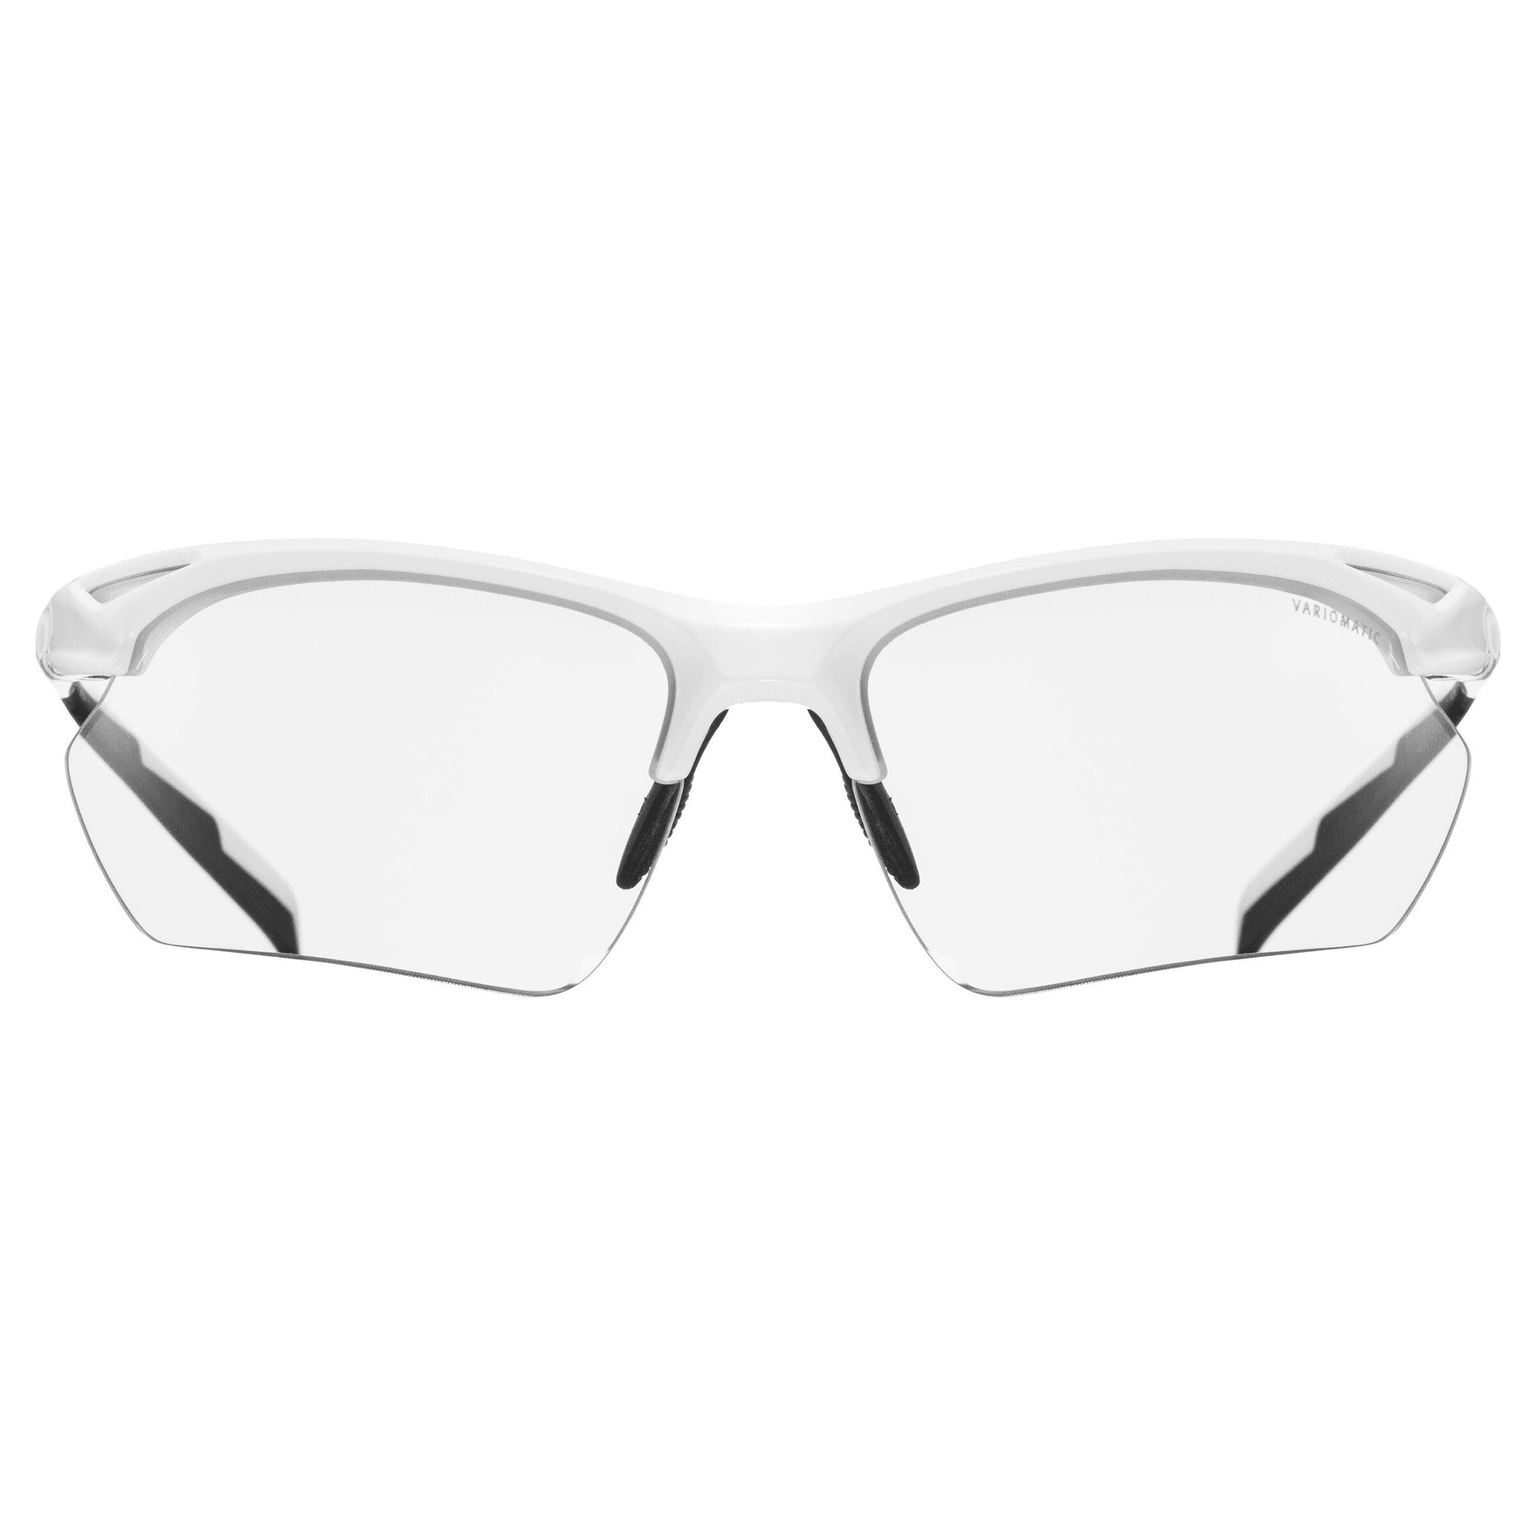 Uvex Uvex Sportstyle 802 V small Lunettes de sport blanc 7